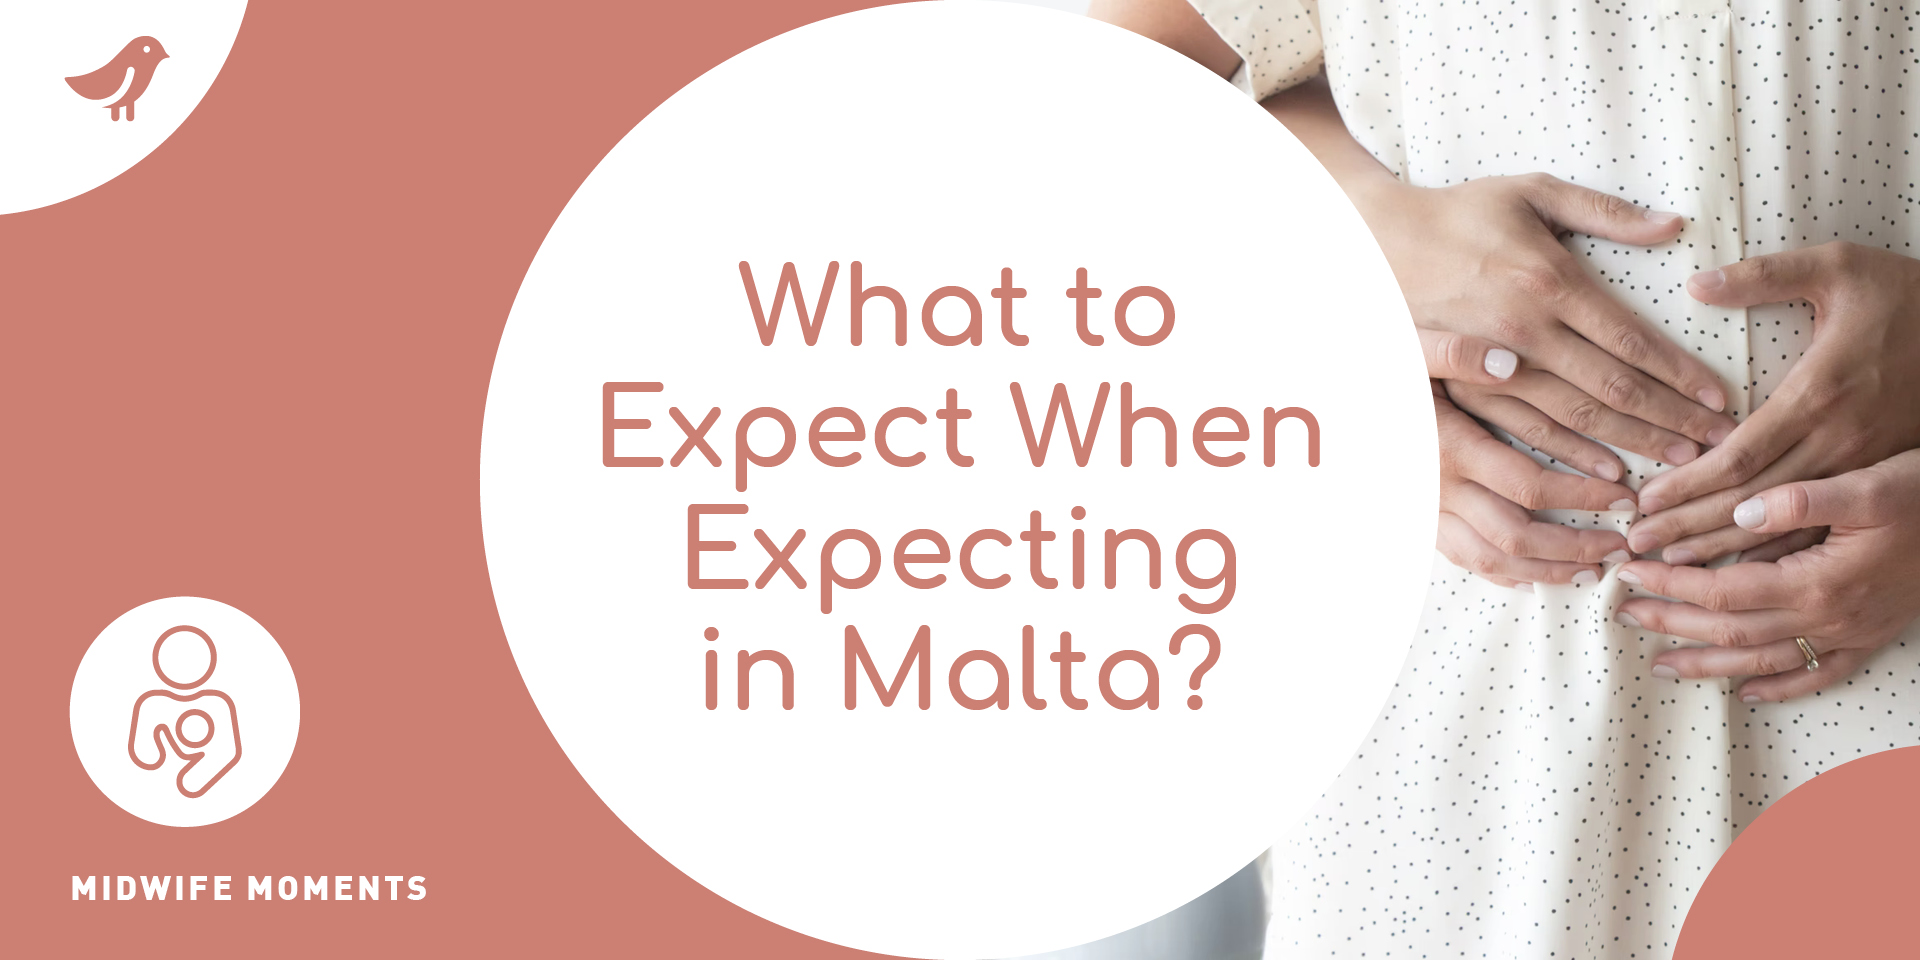 What to Expect When Expecting in Malta?